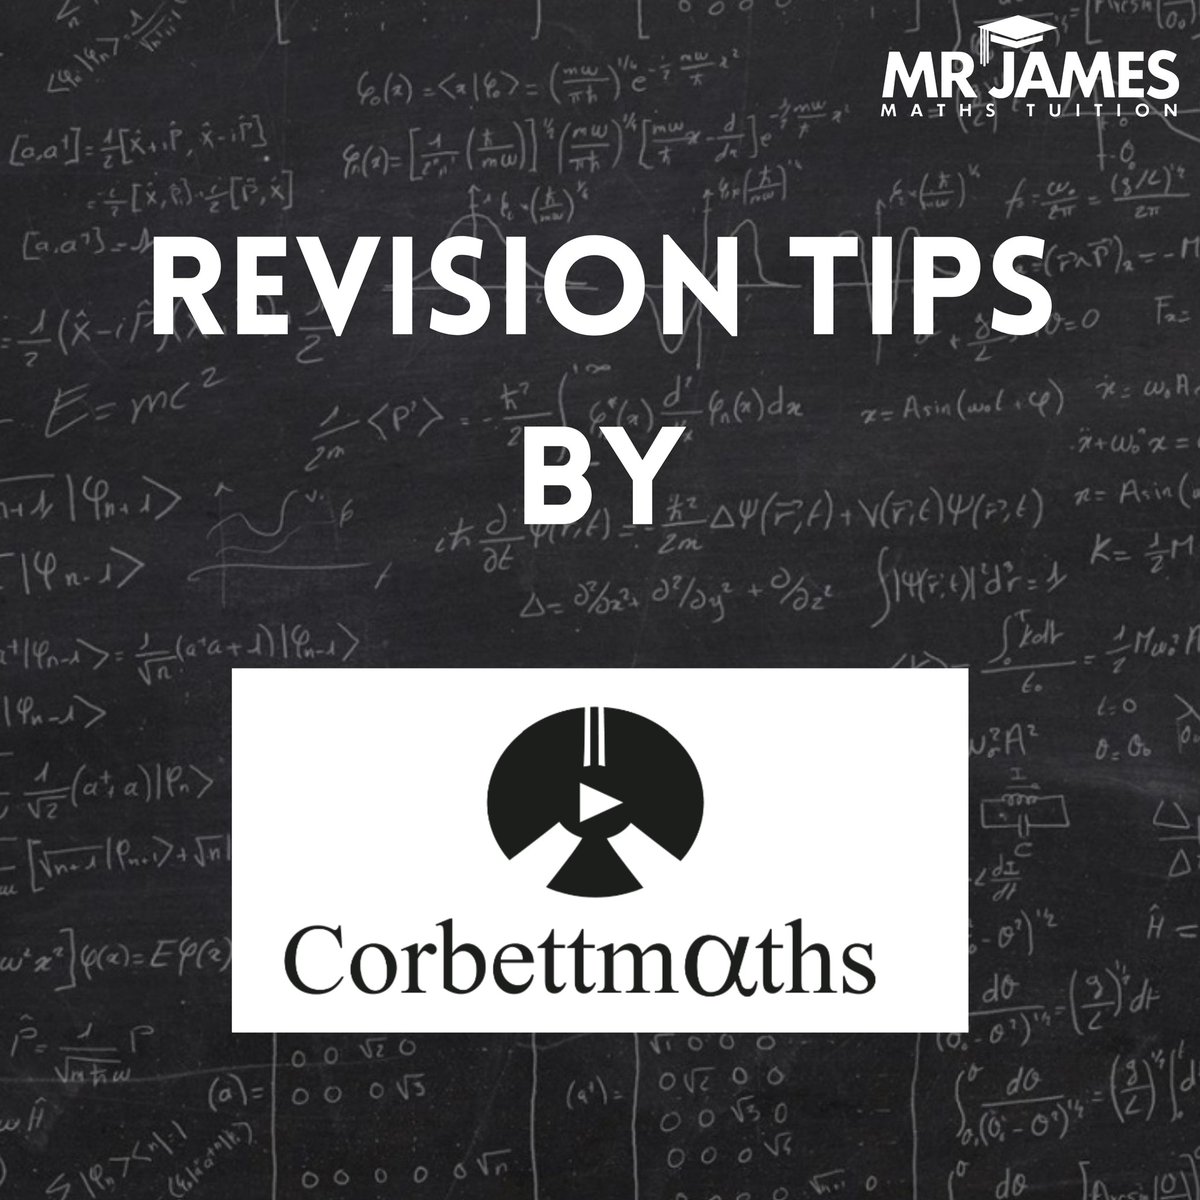 A reminder of some of the fantastic resources which are being offered by @Corbettmaths to help with revision and preparation for this years exams! corbettmaths.com